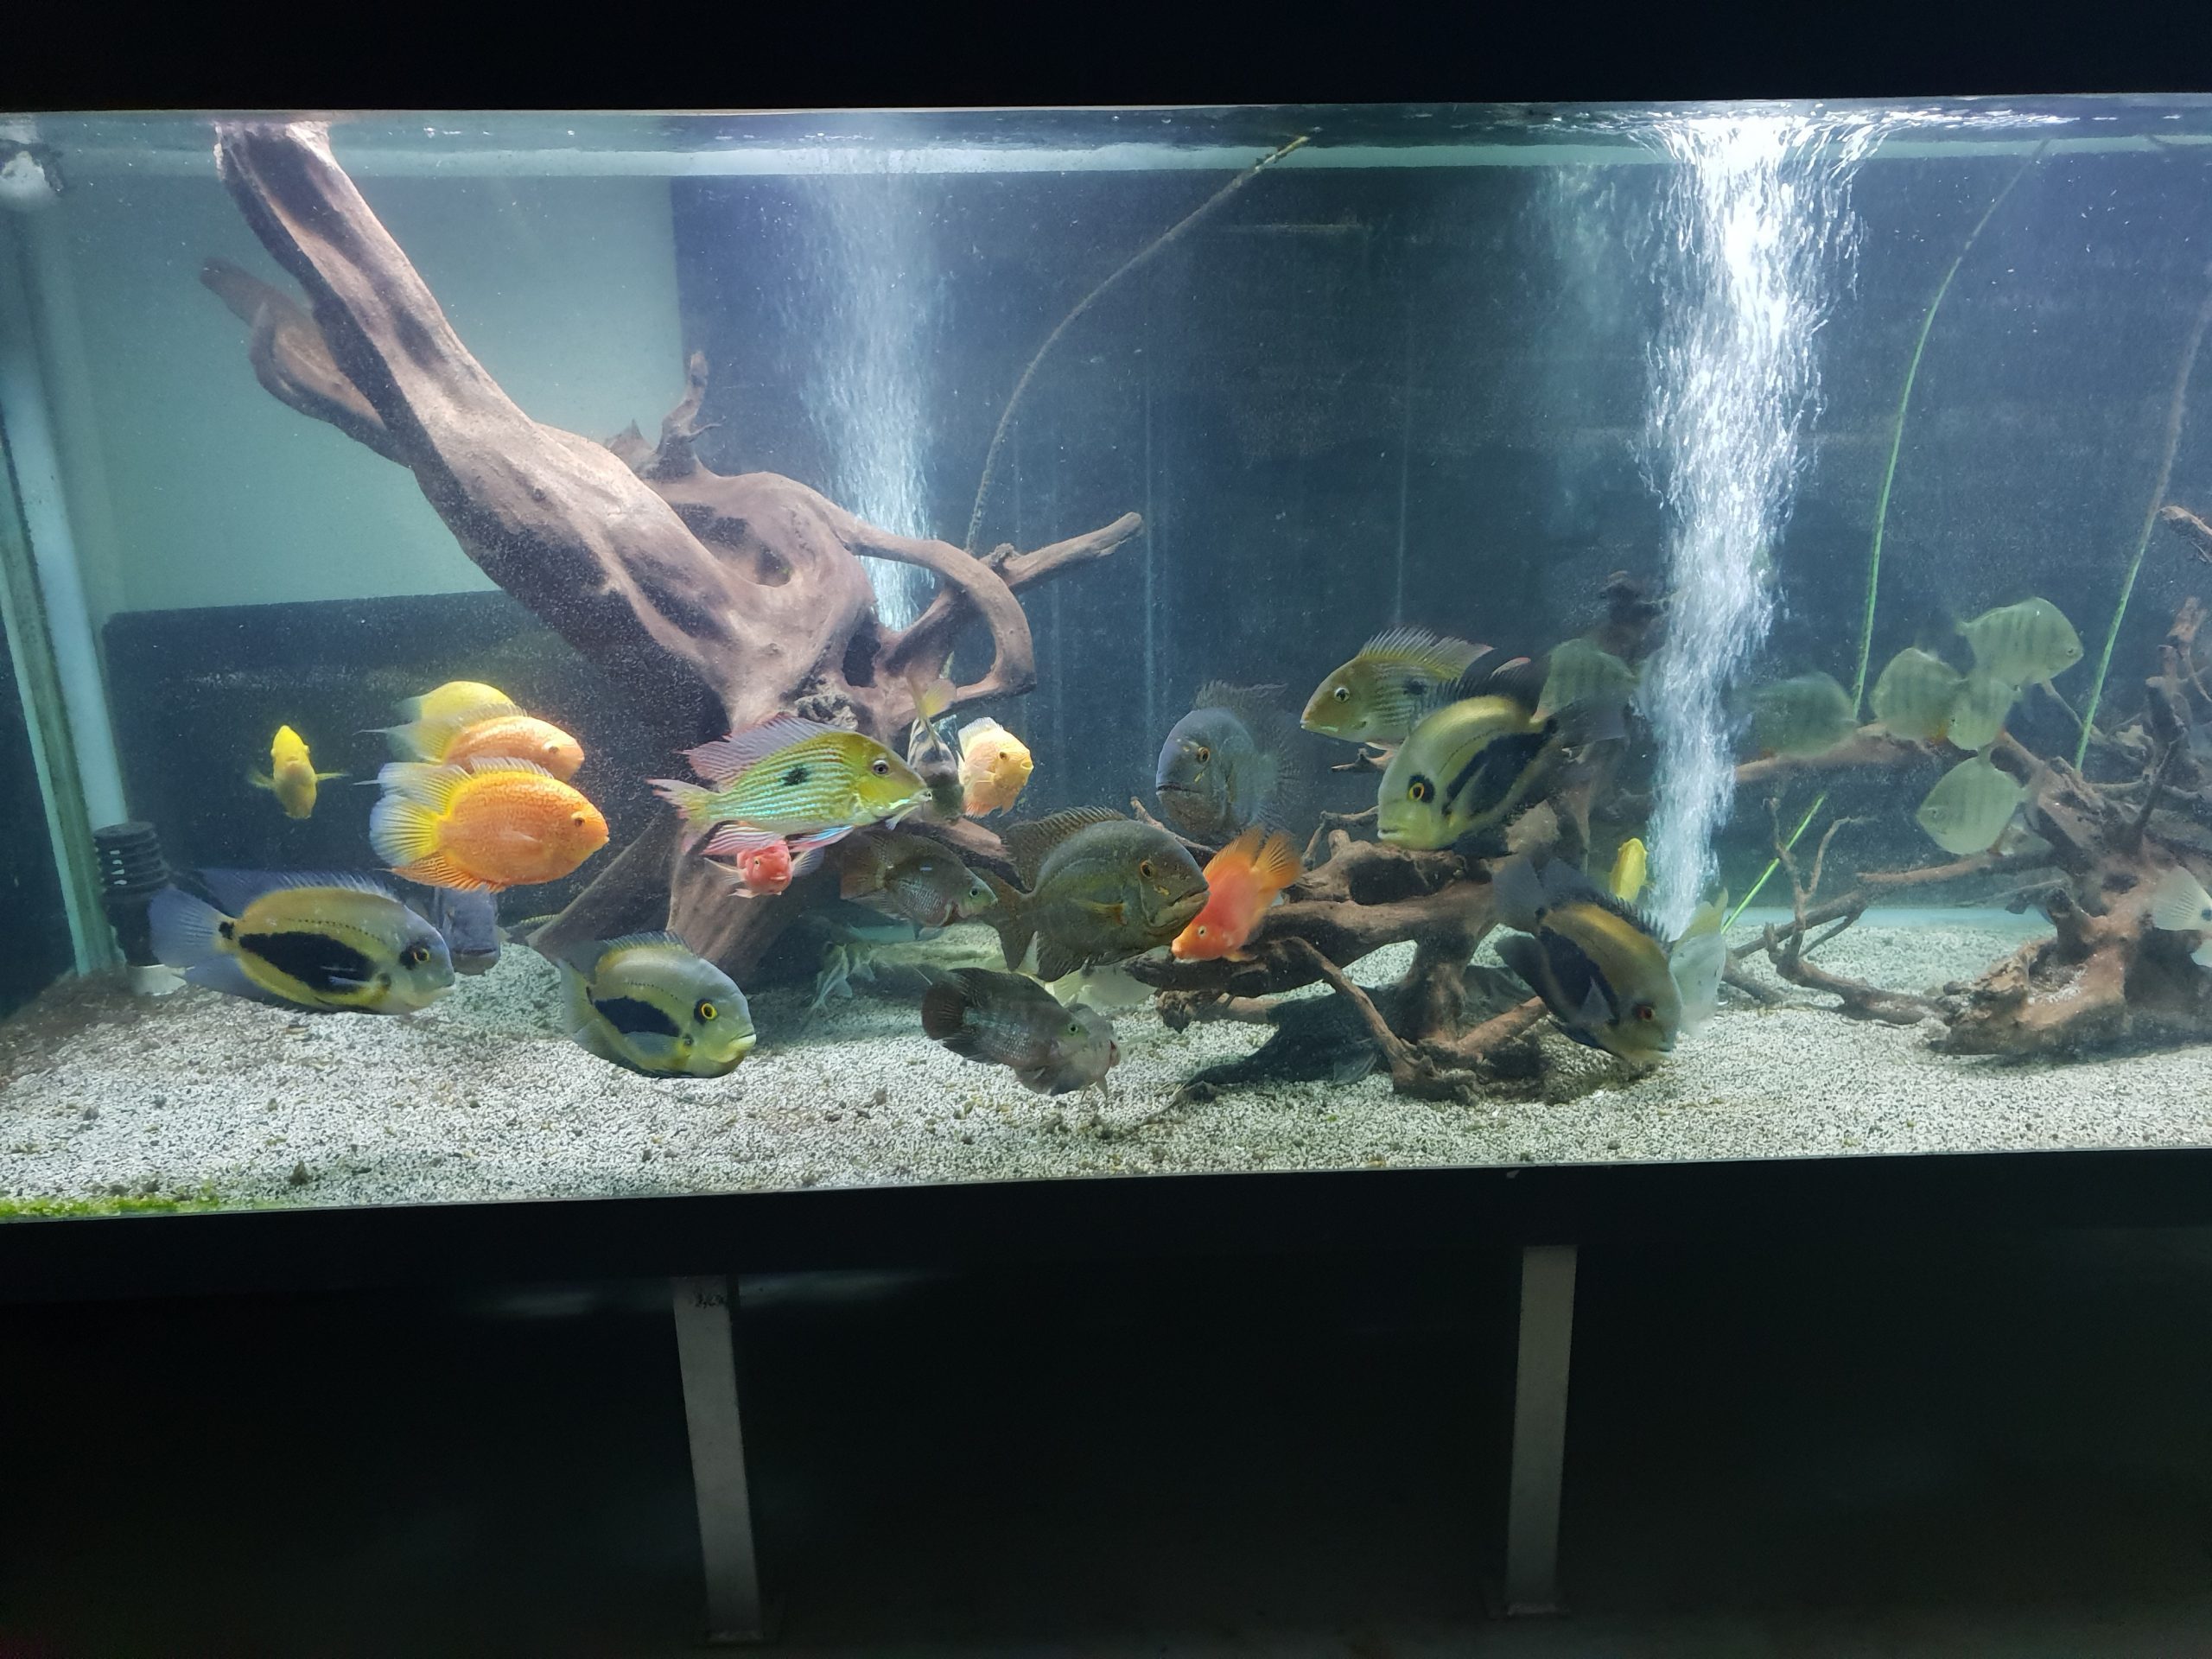 Fish tank in a private home  3.2m long x 80cm wide x 1m deep